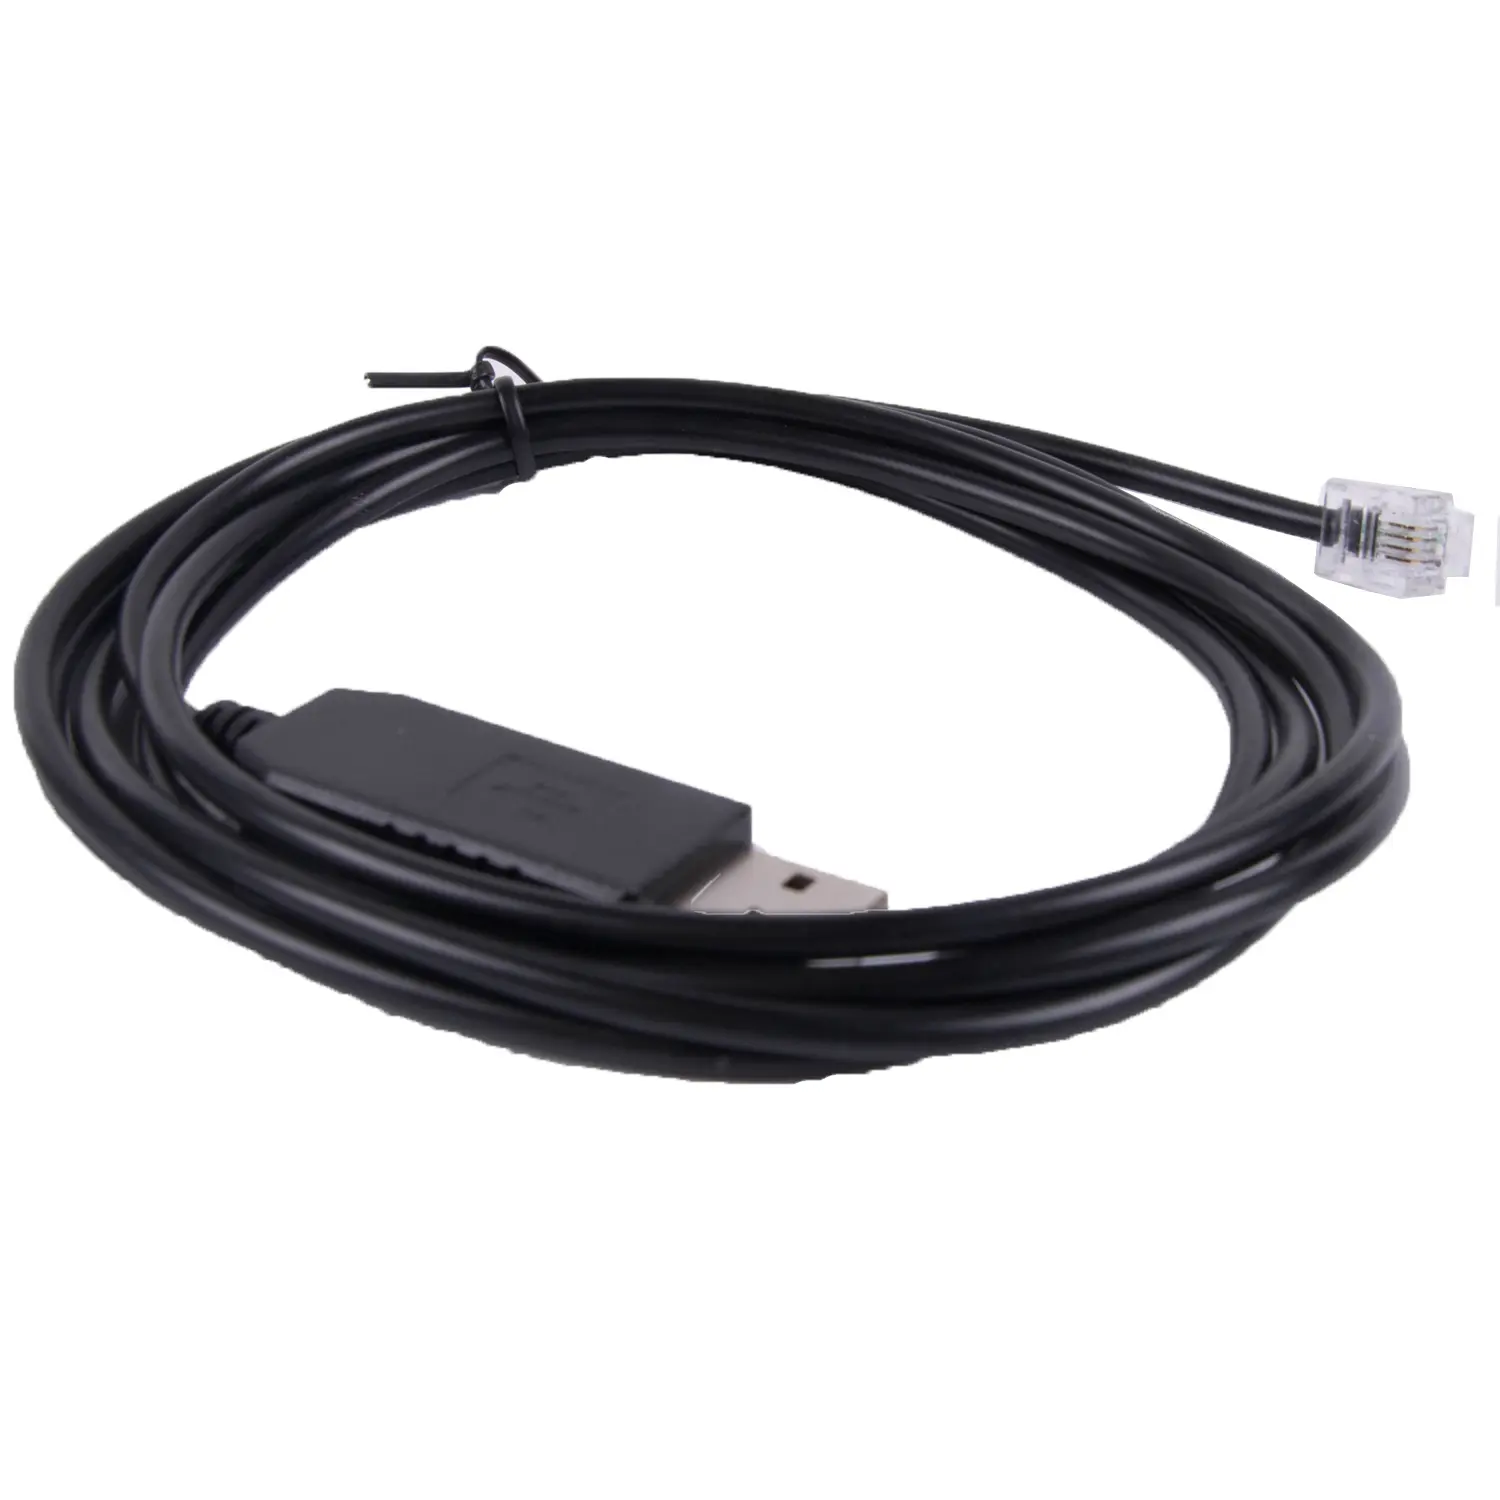 Kamstrup 162 382 en351 Dutch Smart Meter FTDI USB to RJ11 UART TTL Serial Cable, Domoticz on Raspberry USB to P1 Port Cable